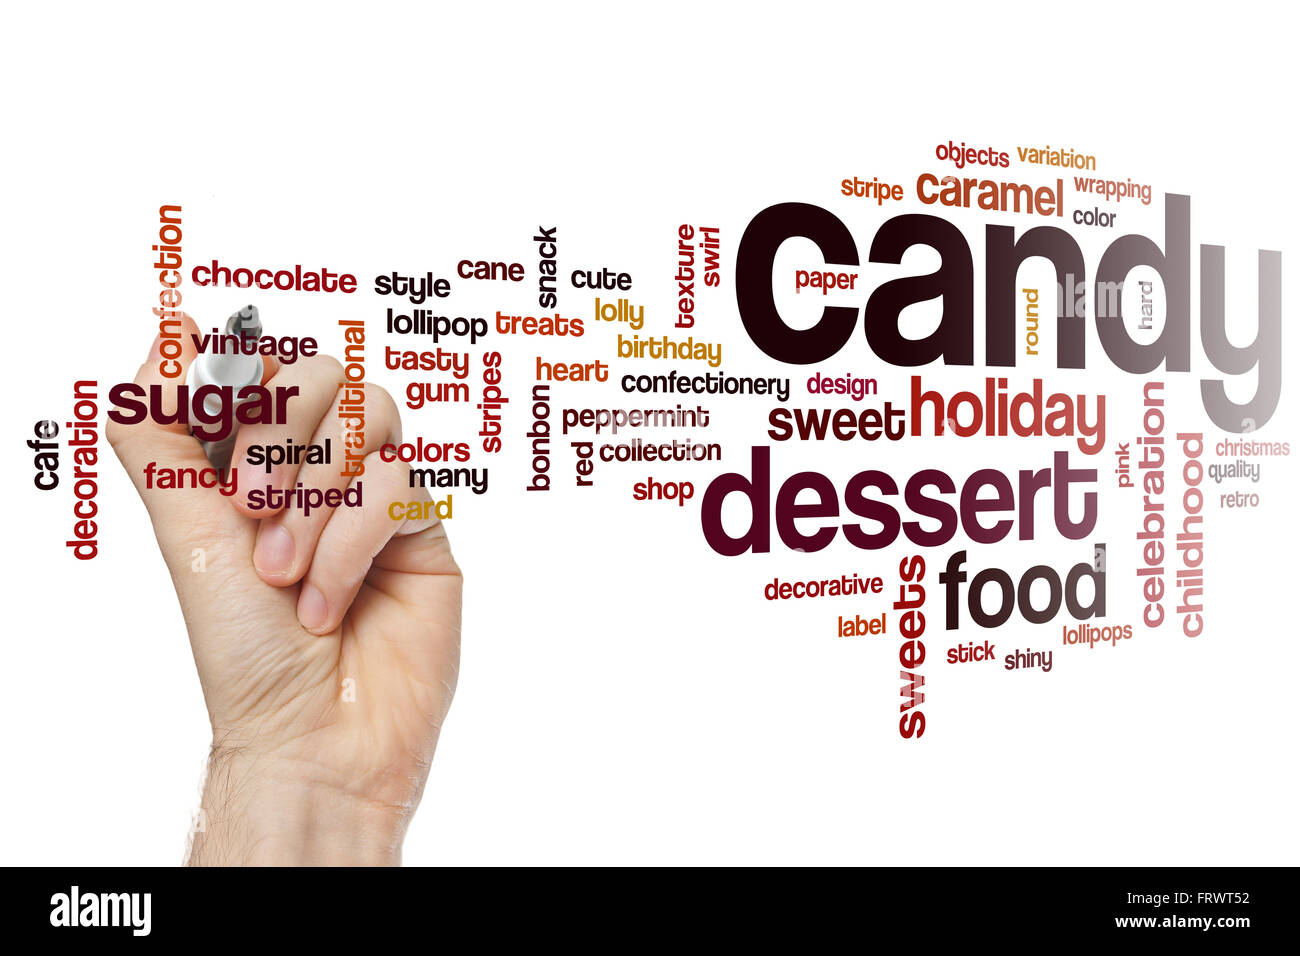 Candy word cloud concept with food dessert related tags Stock Photo